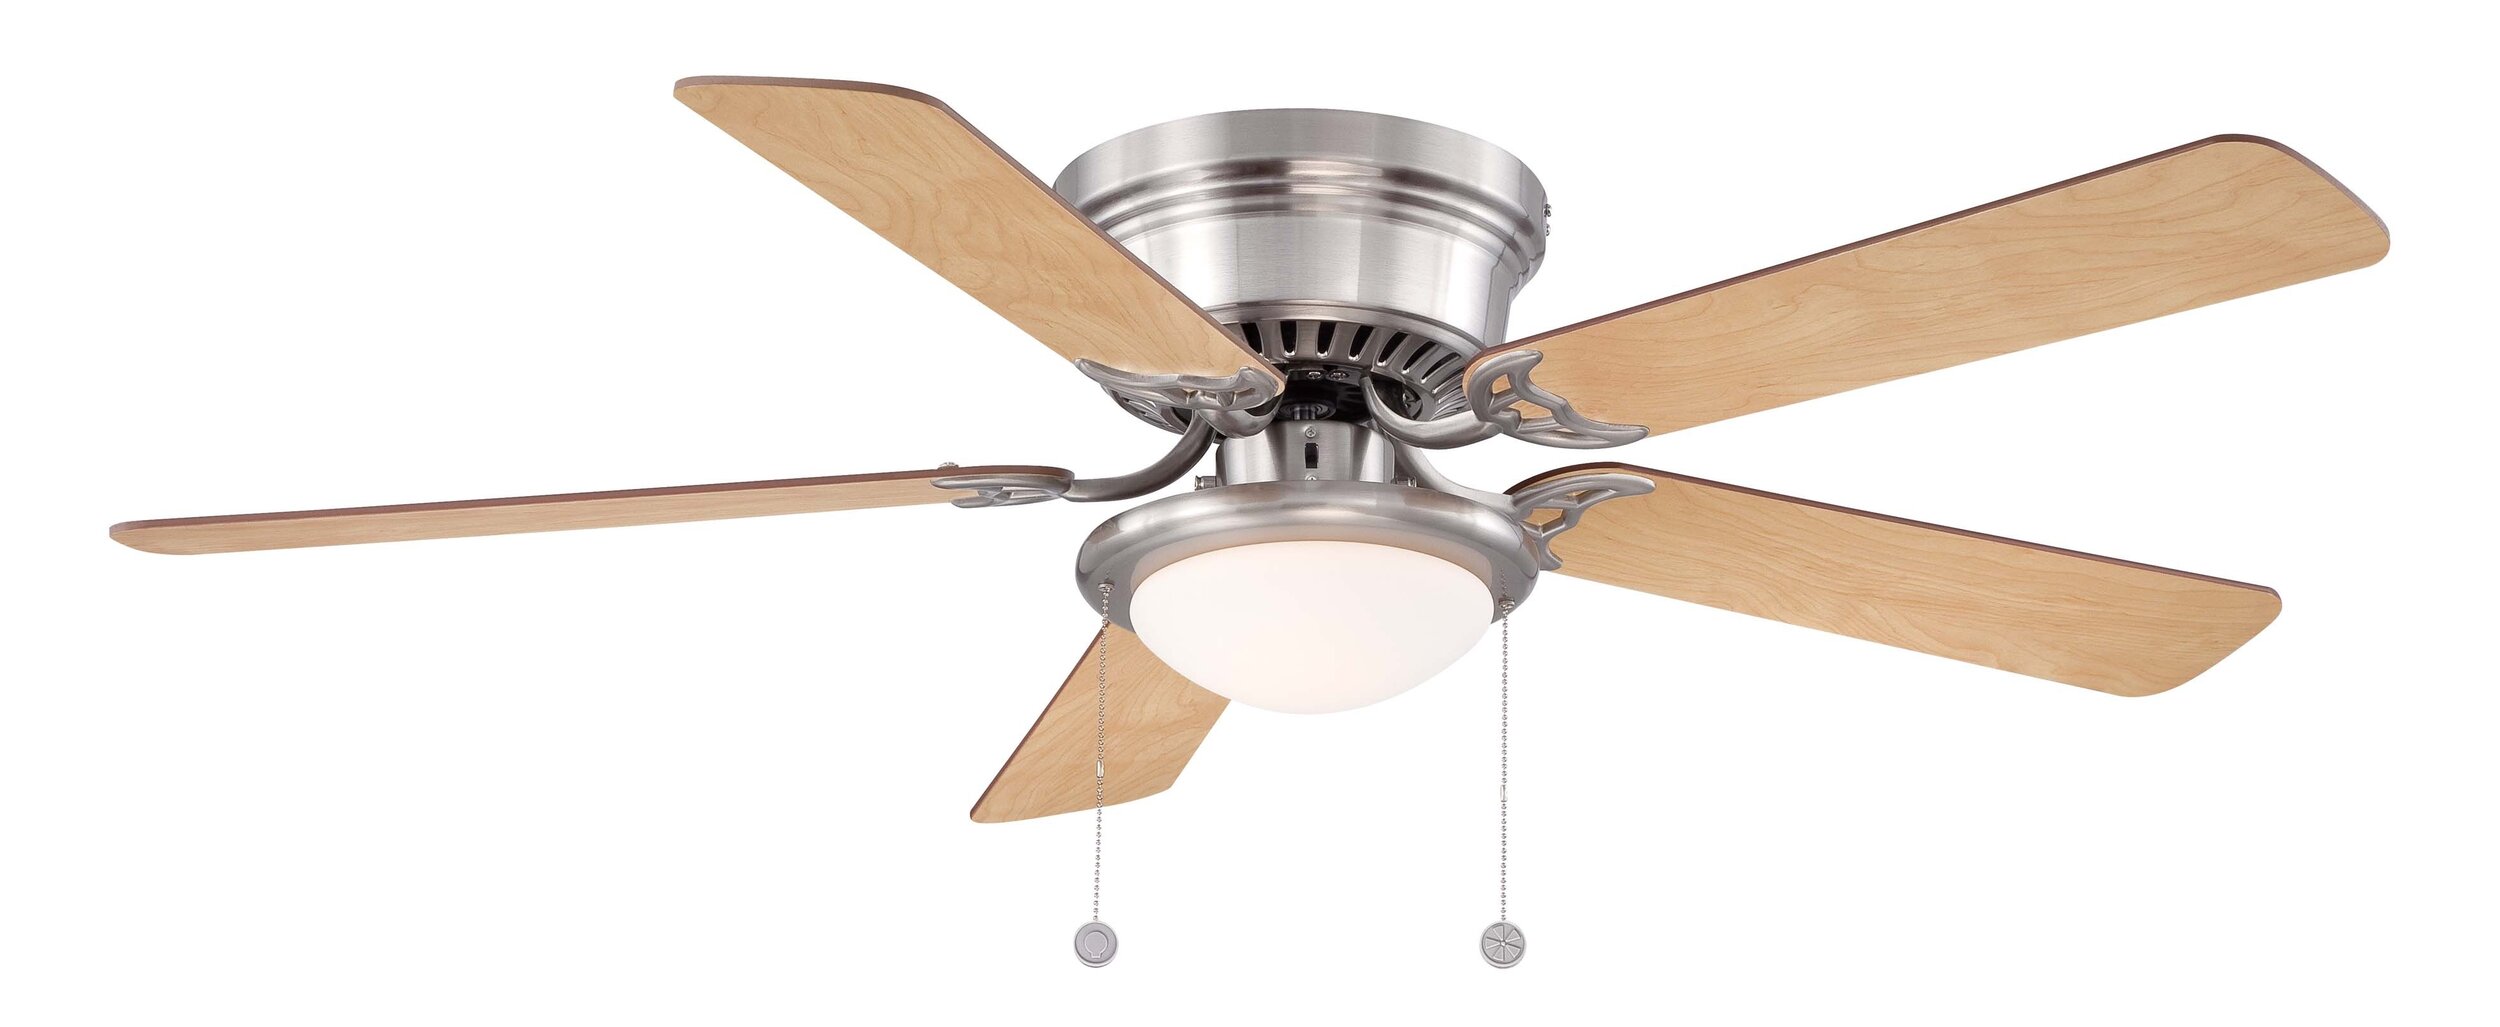 Details about   Hugger 52 in Ceiling Fan with LED Light Gunmetal Low Ceiling Flush Mount 